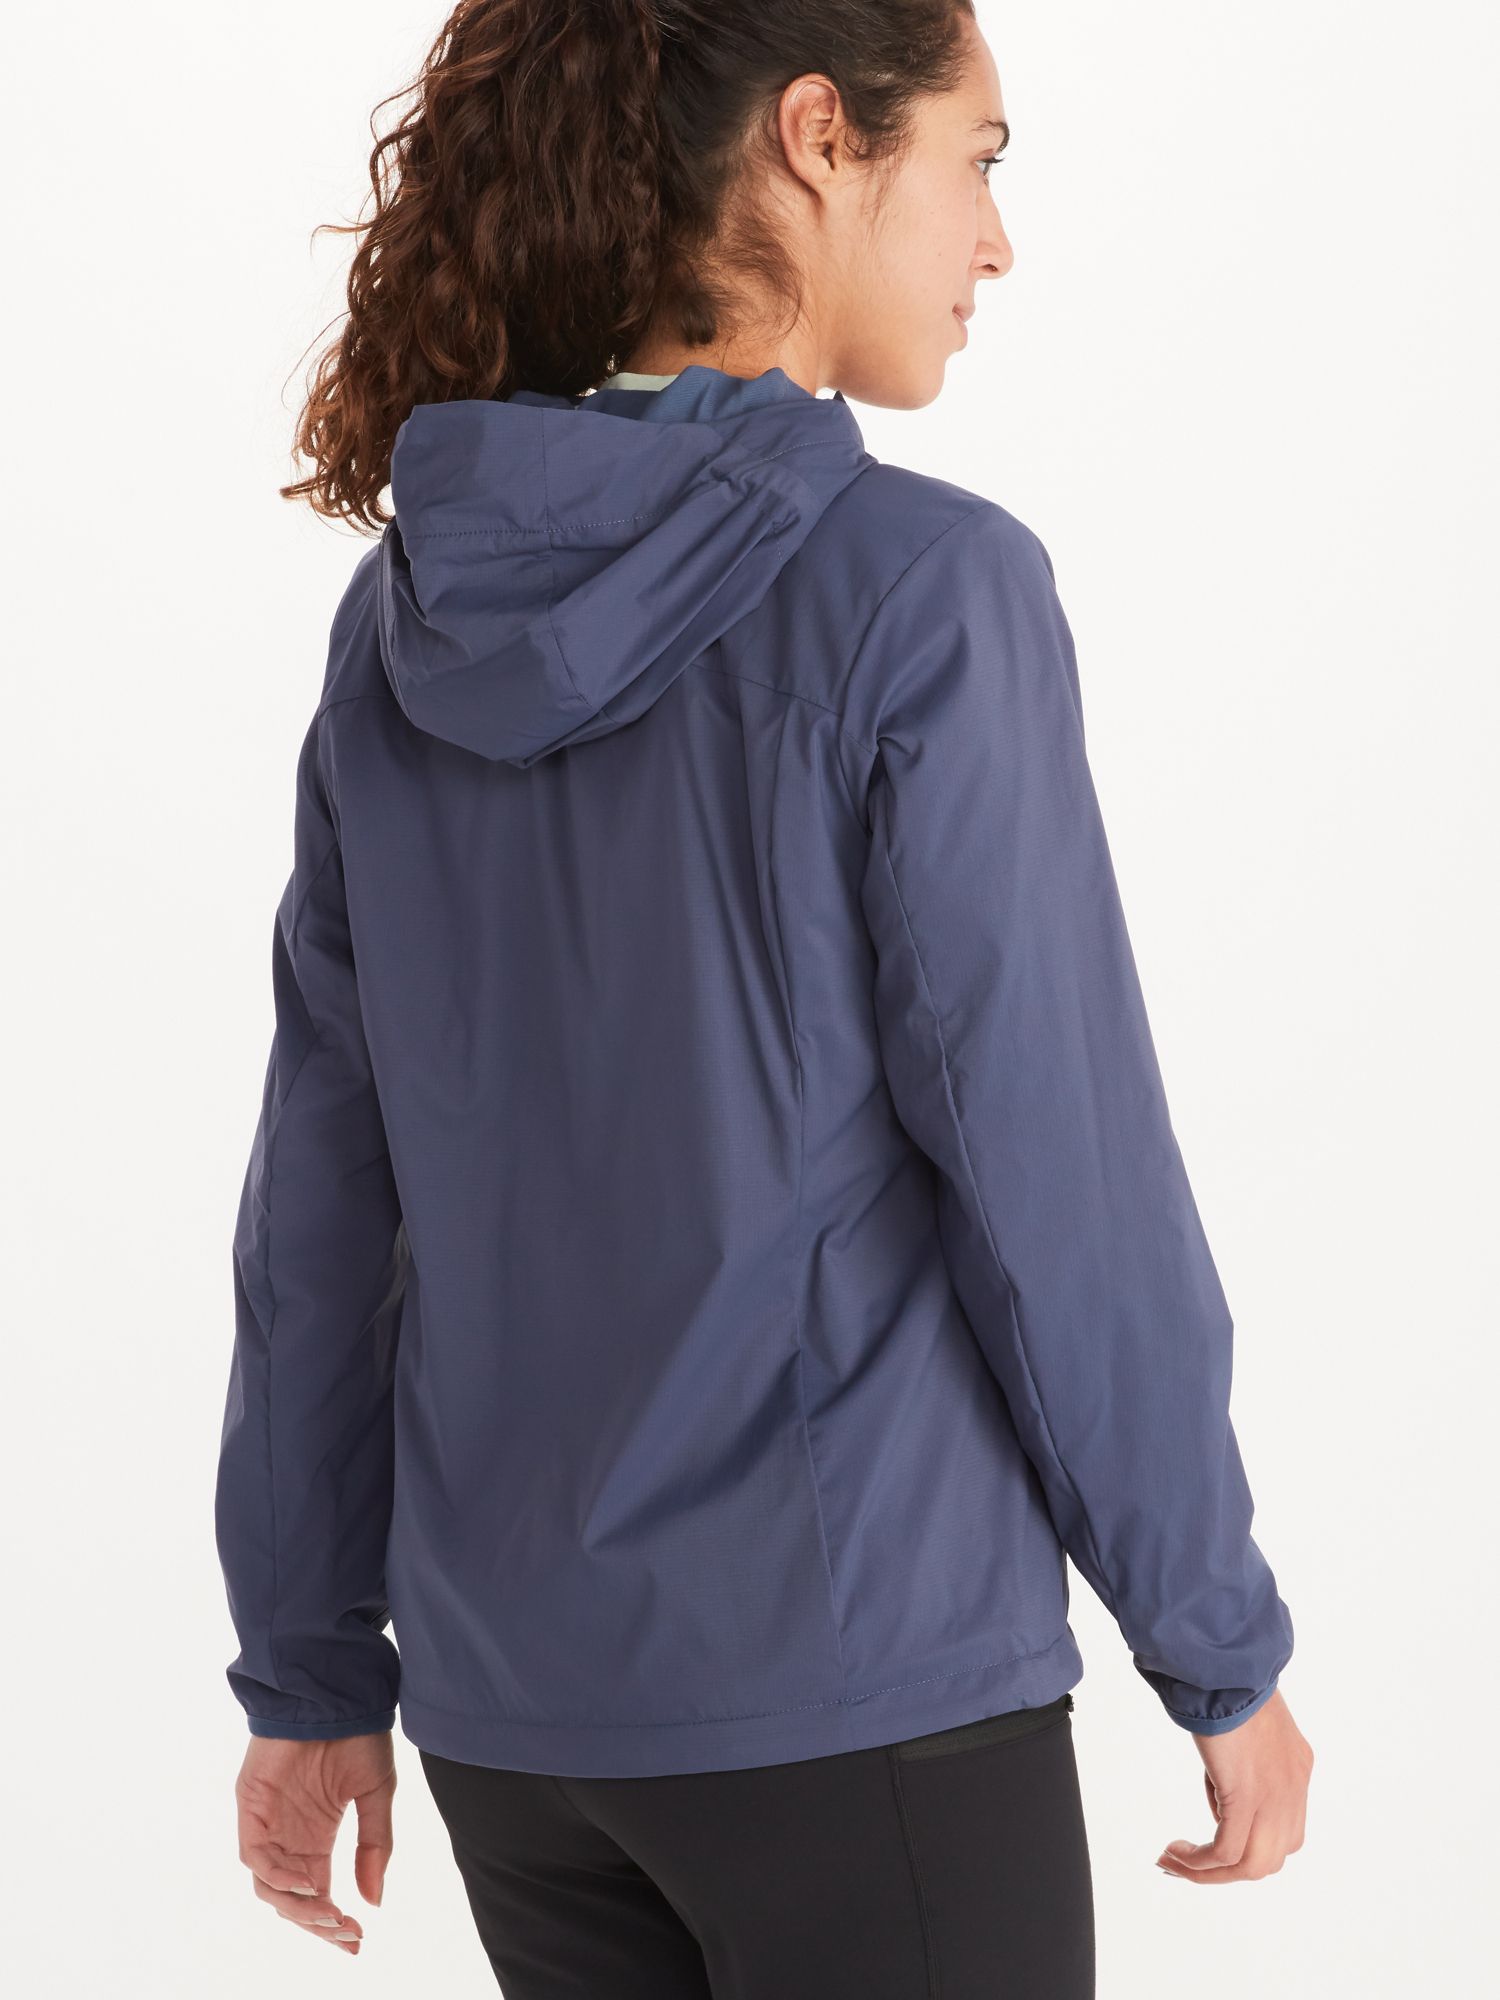 Women's Ether DriClime Hoody